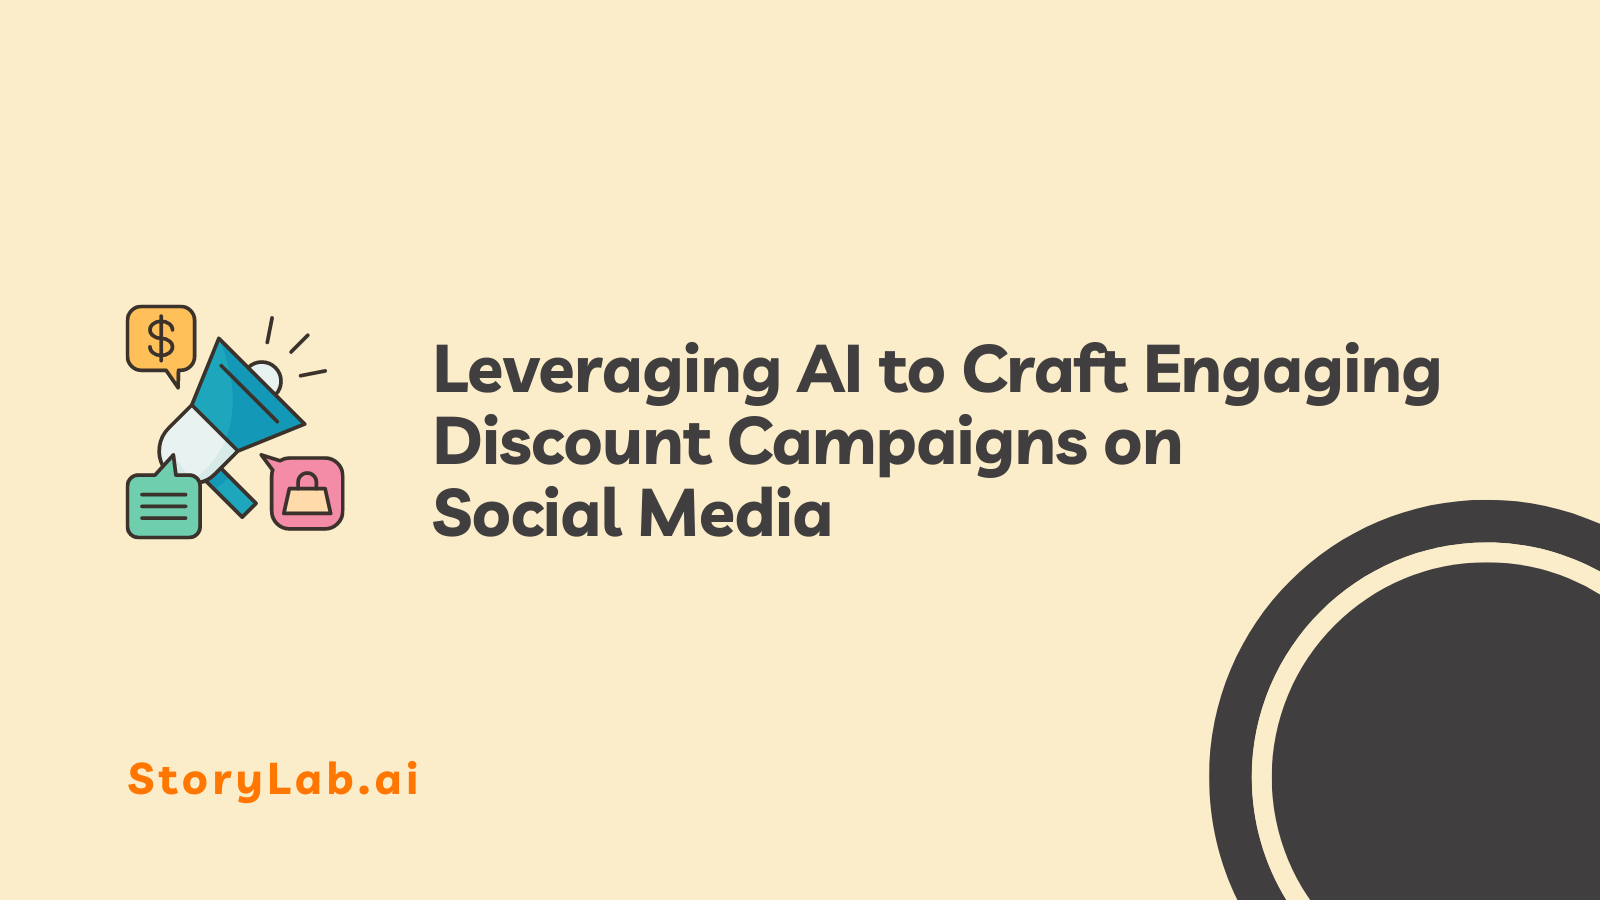 Leveraging AI to Craft Engaging Discount Campaigns on Social Media